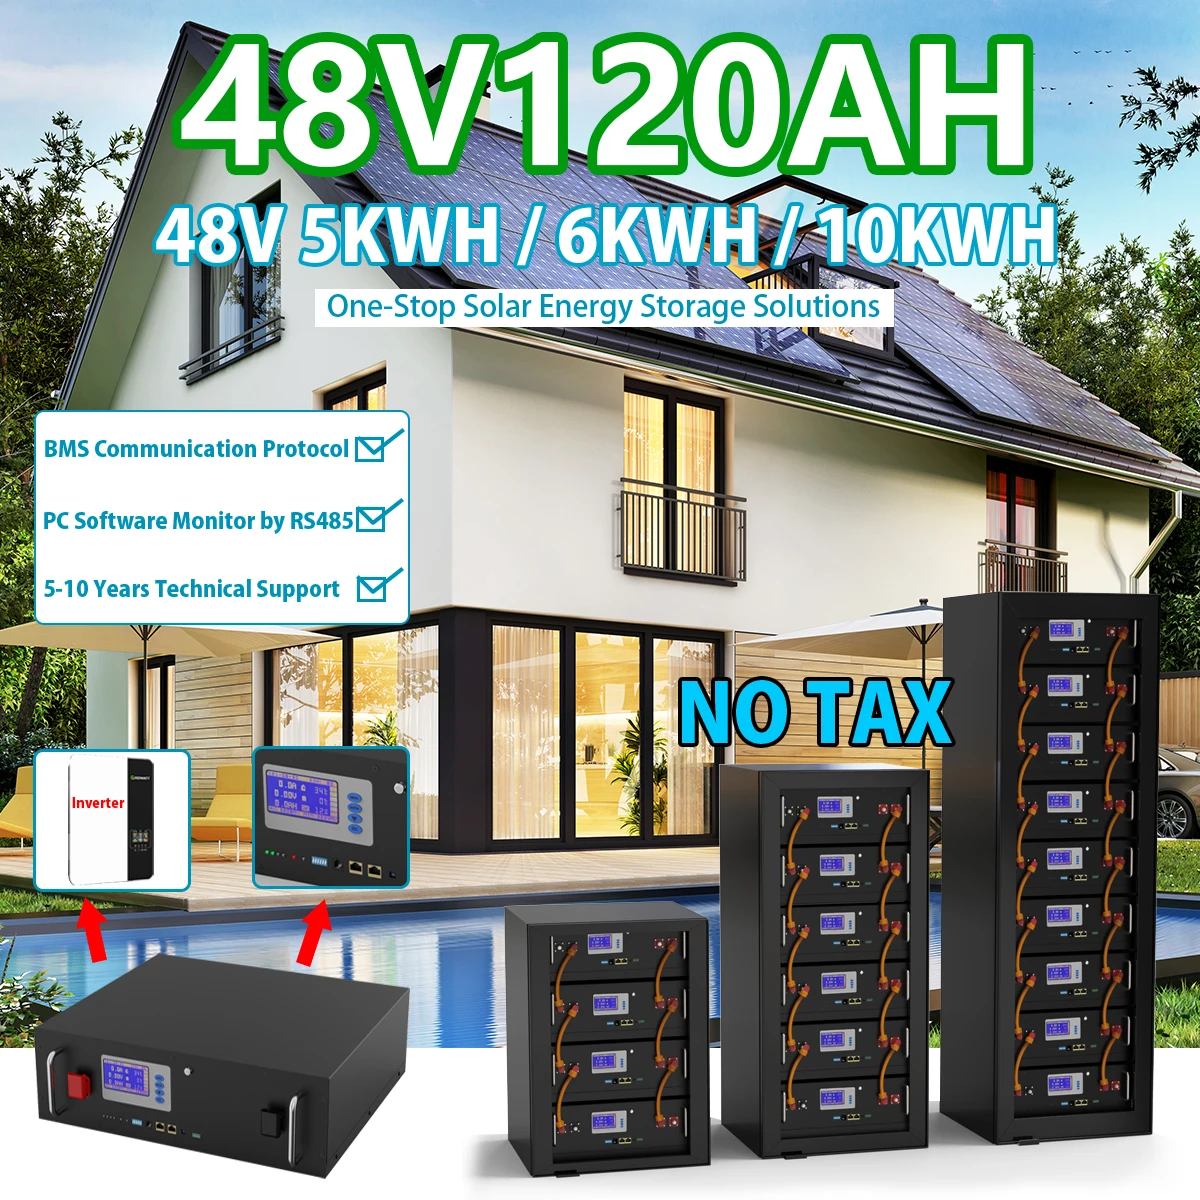 48V 120Ah 200Ah LiFePO4 Battery Pack 6000 Cycles 51.2V 6Kw 10Kw 32 Parallel PC Monitor 16S Smart BMS Lithium Battery EU Free Tax